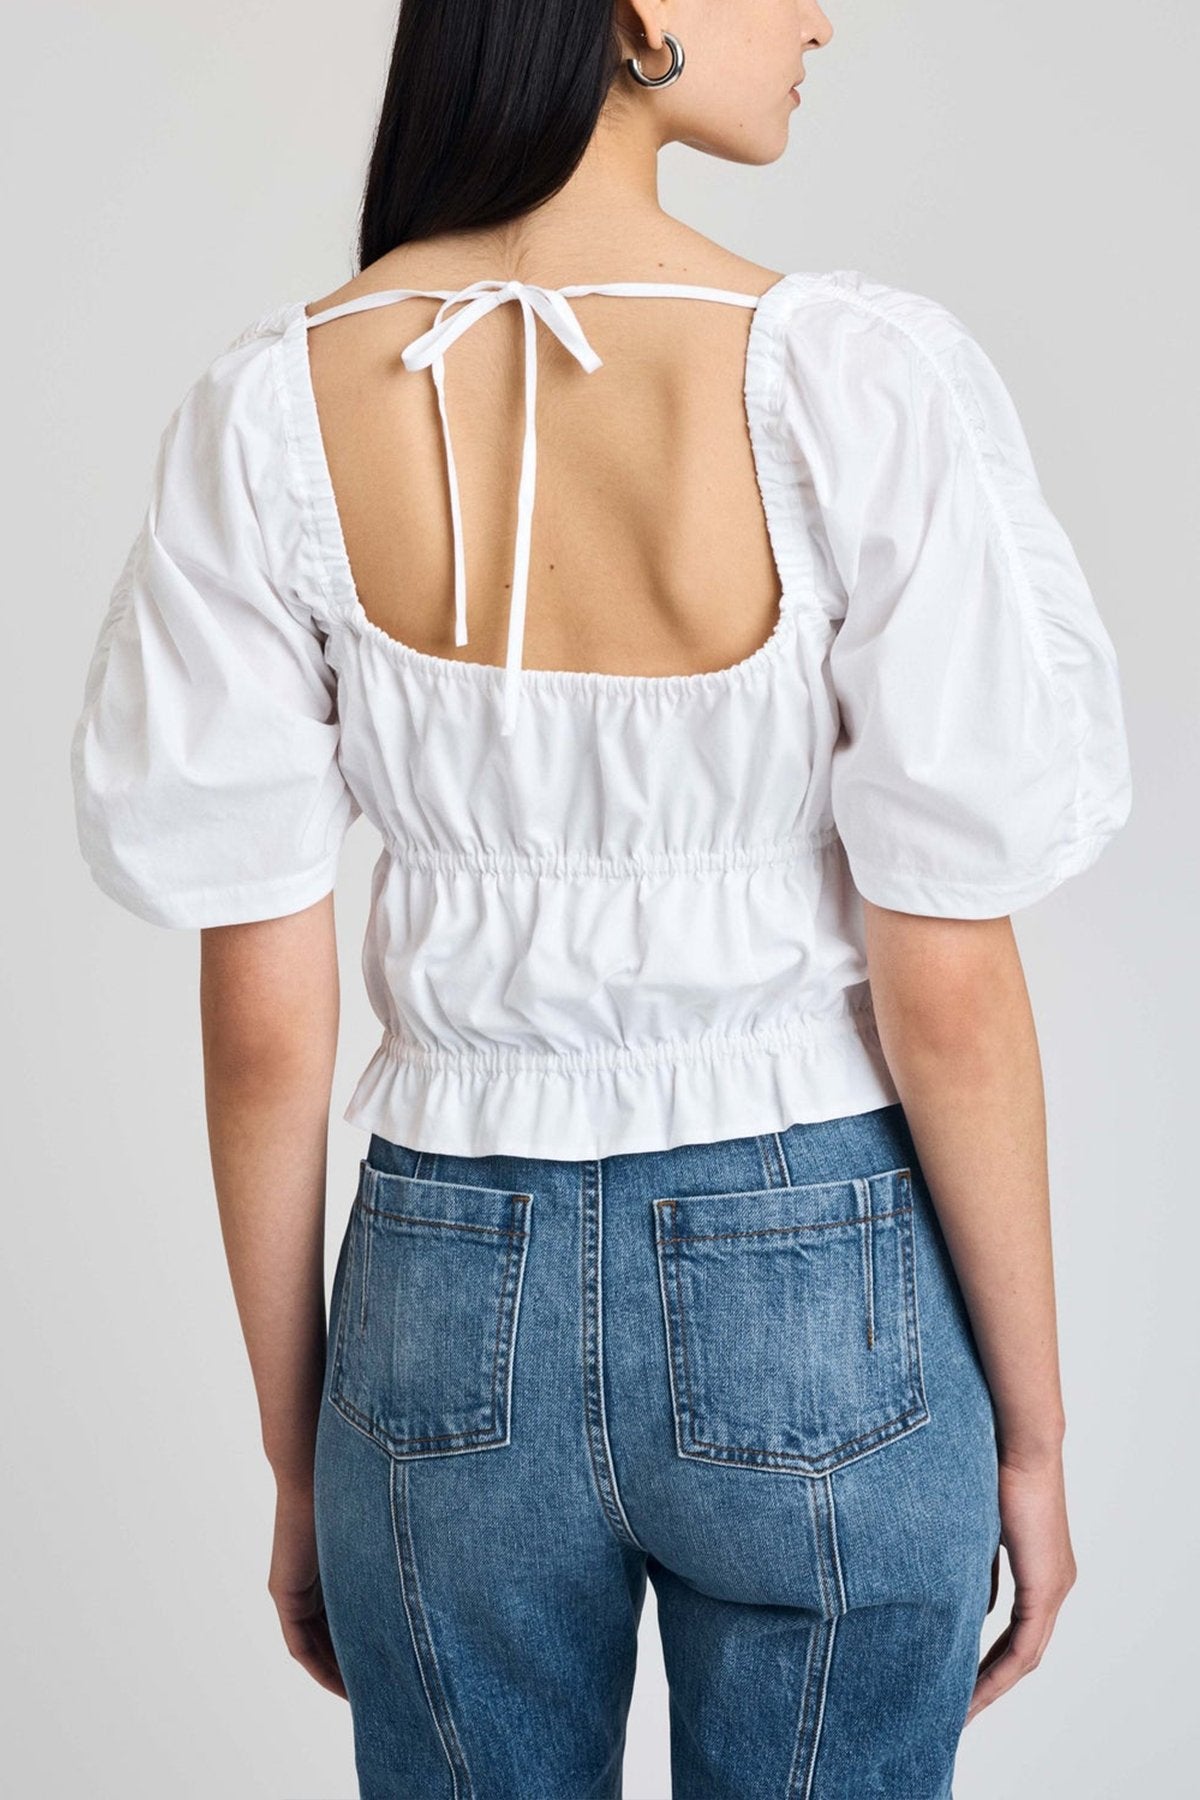 Elora Puff Sleeve Smocked Top in White - shop-olivia.com